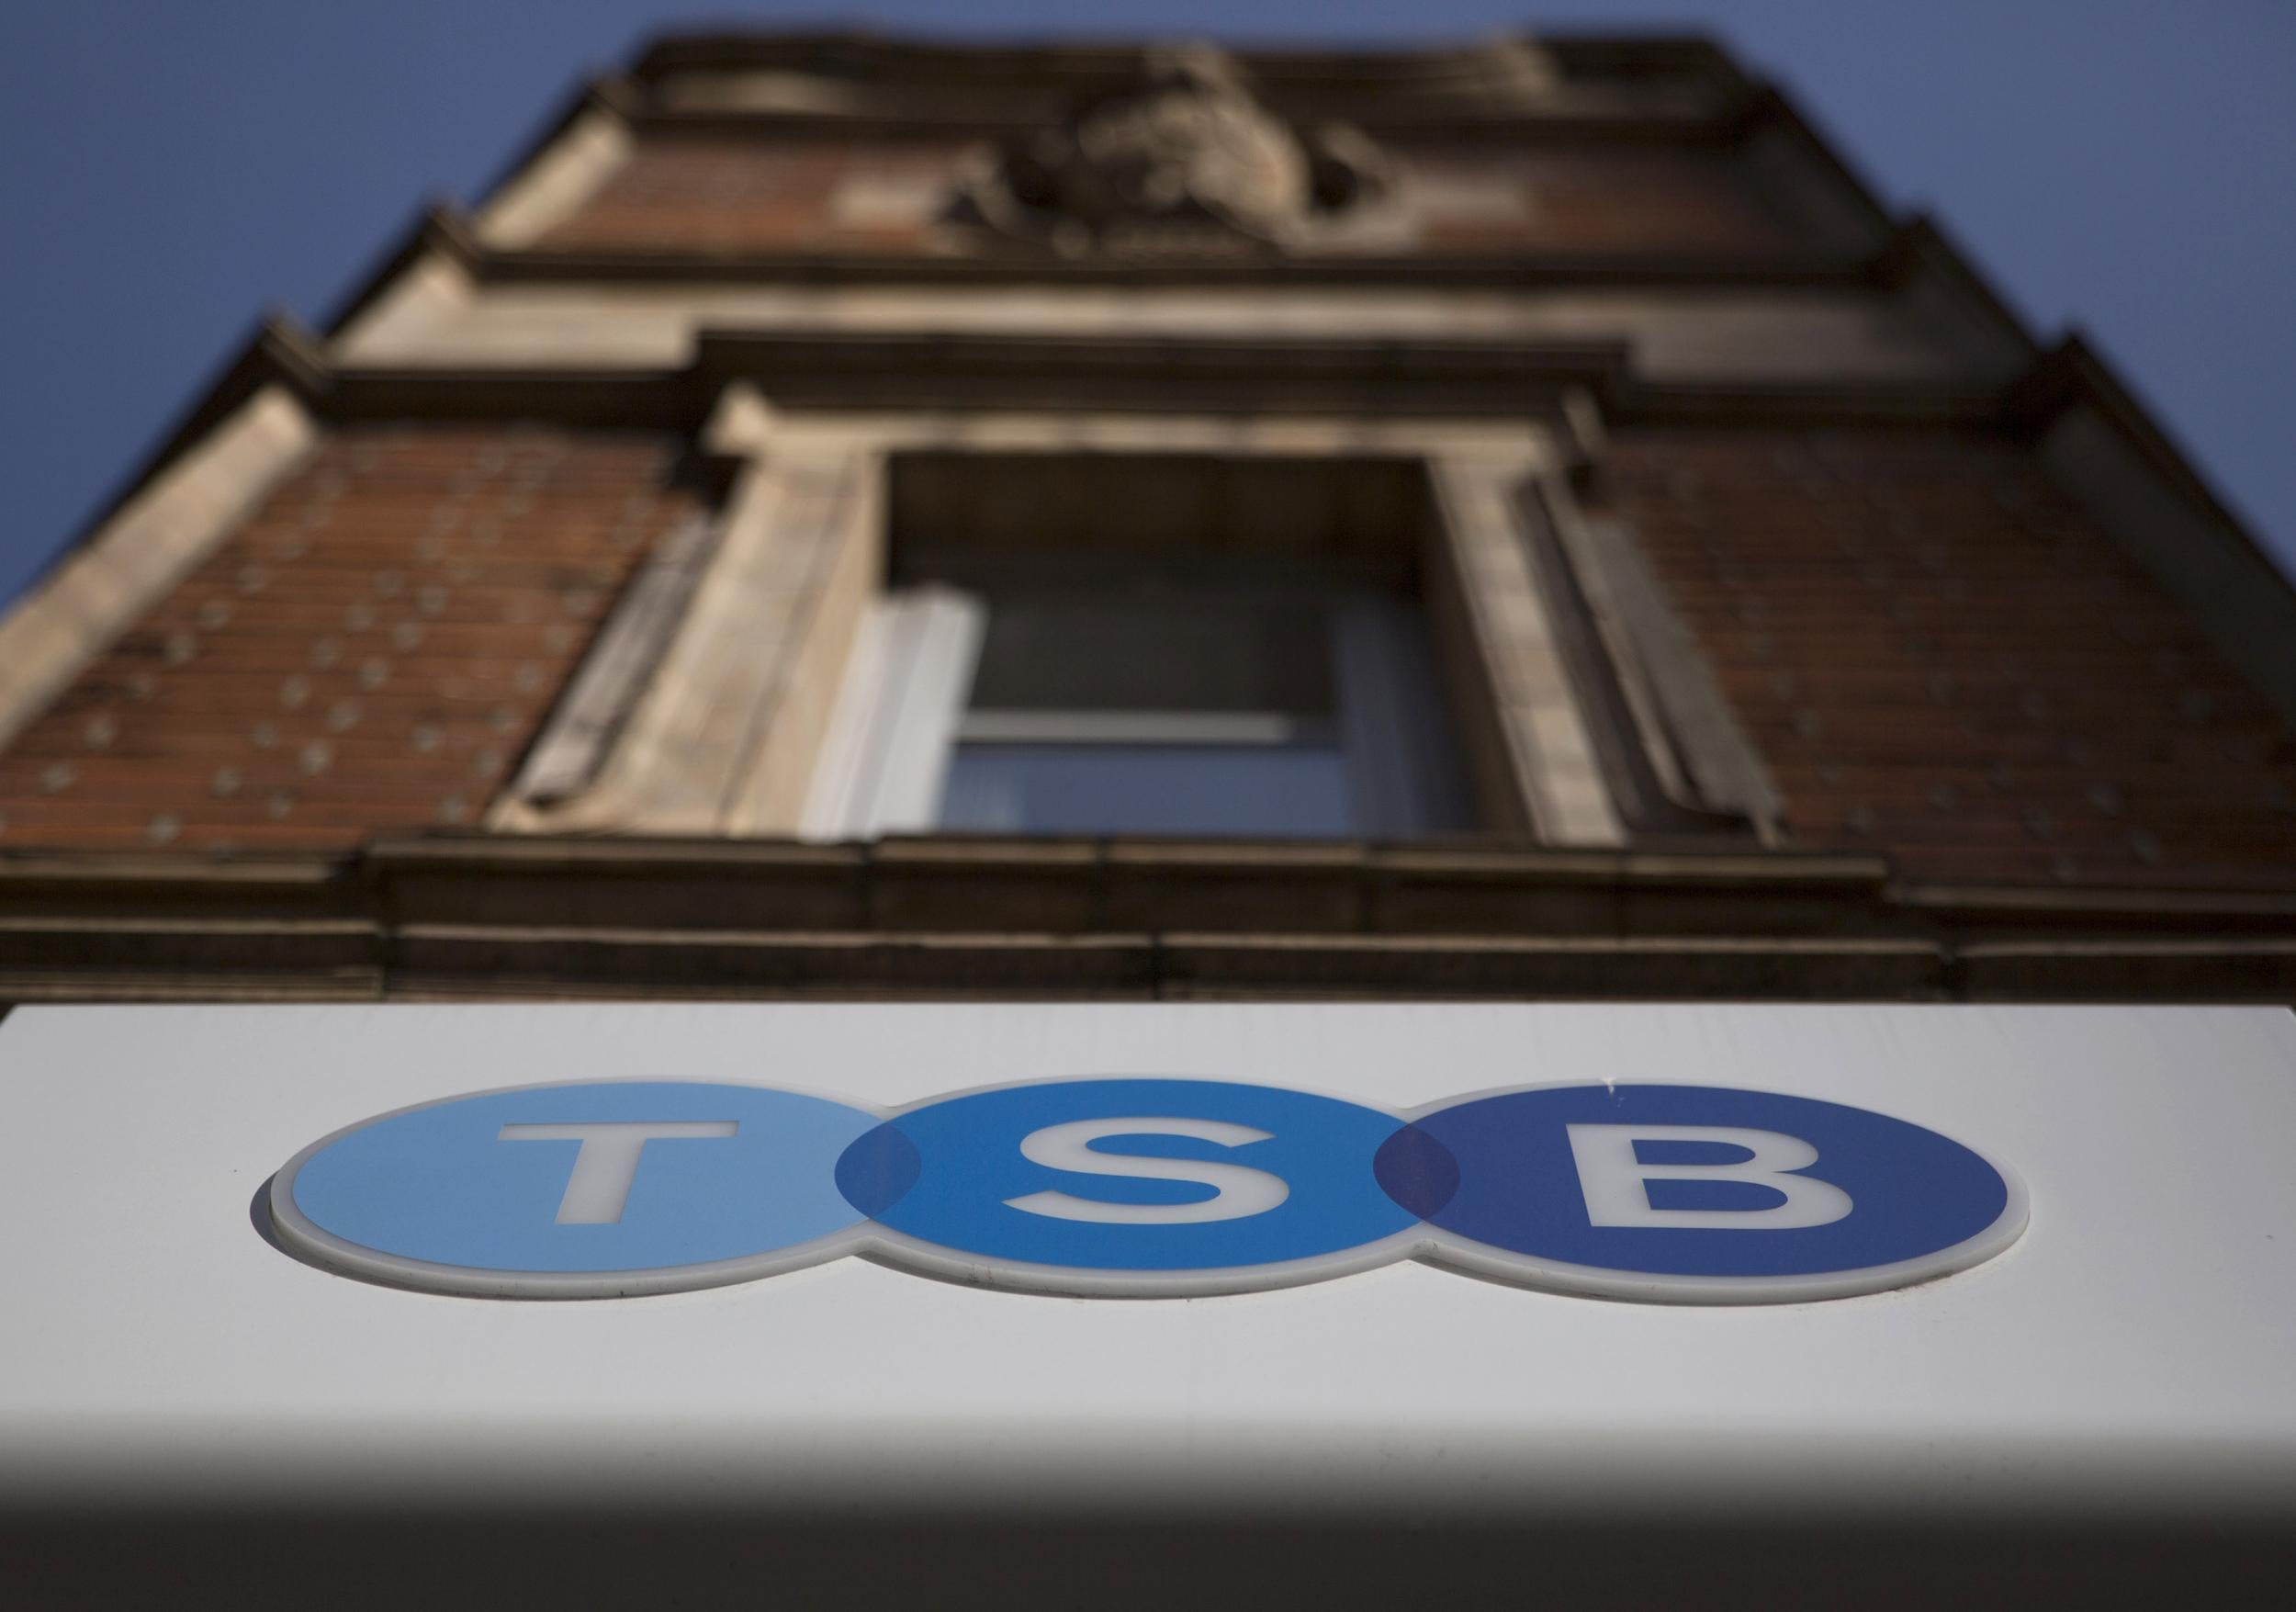 TSB is facing flak from all sides over its handling of an IT foul up